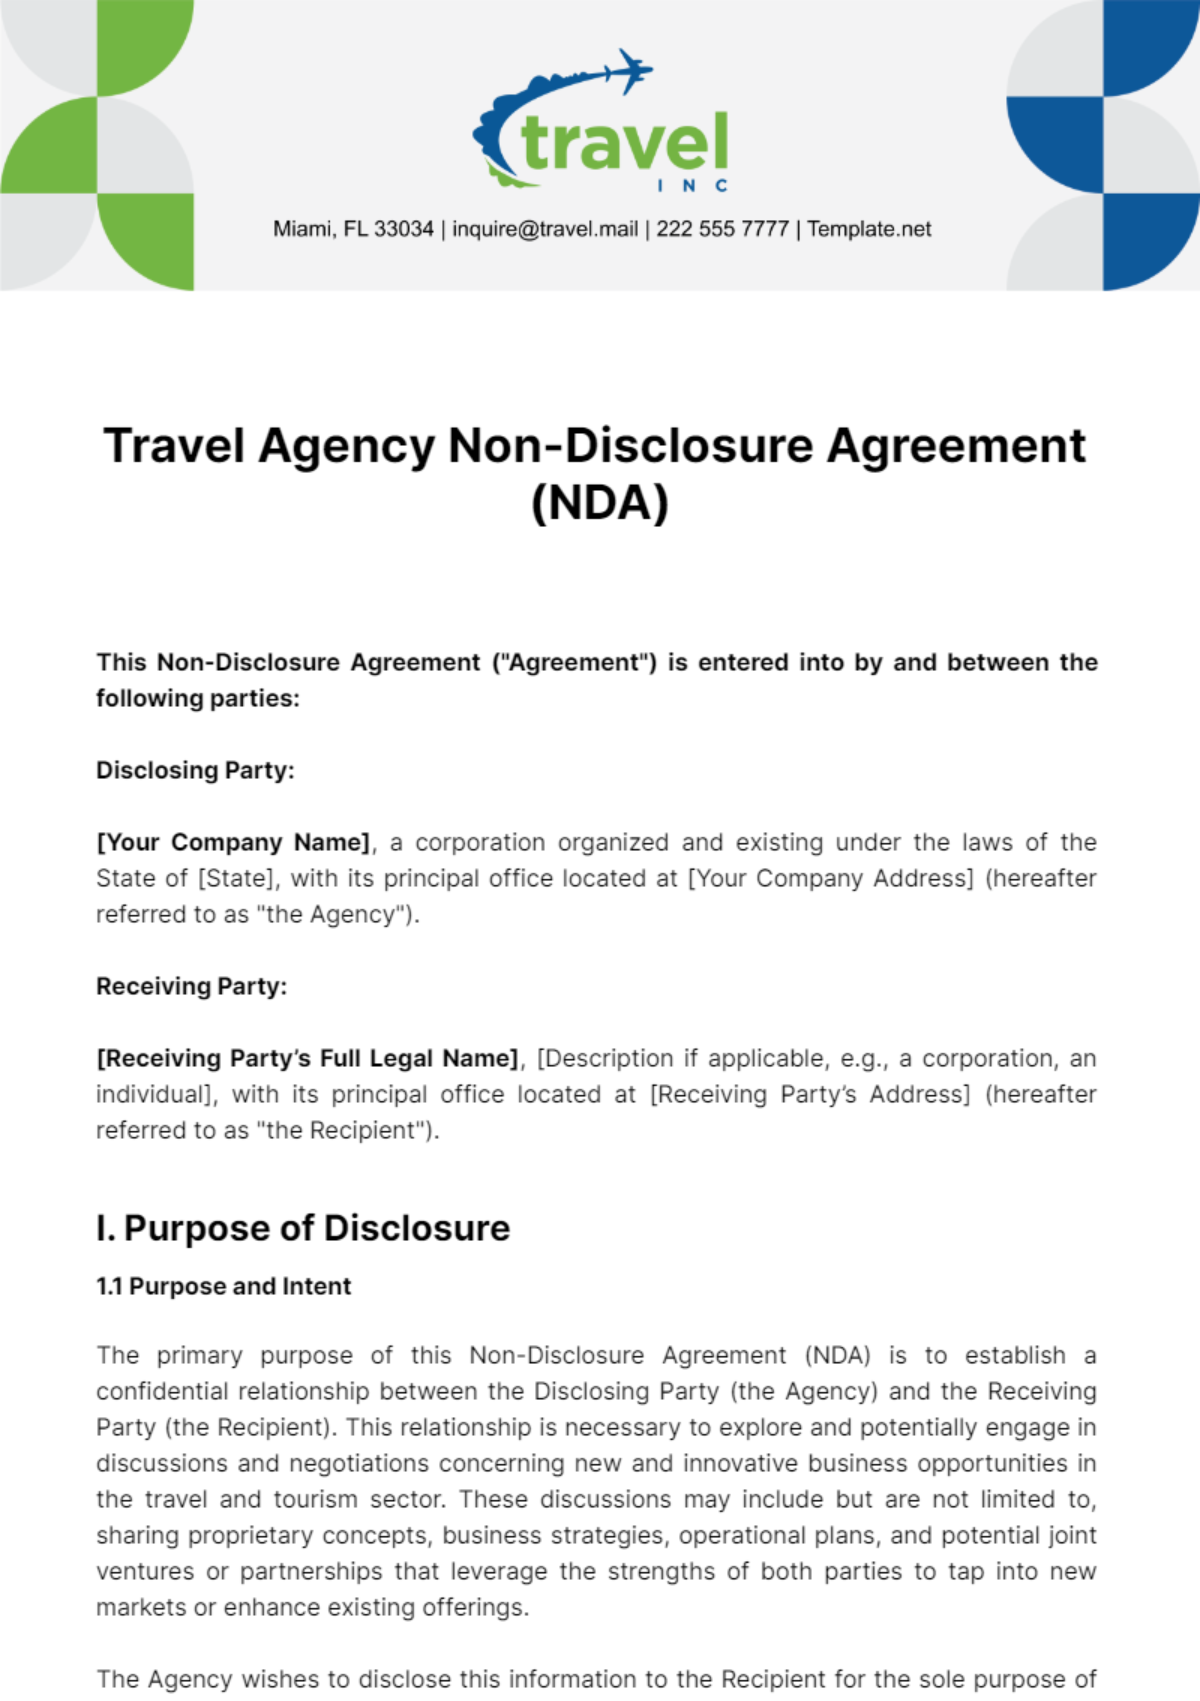 Free Travel Agency Non-Disclosure Agreement Template